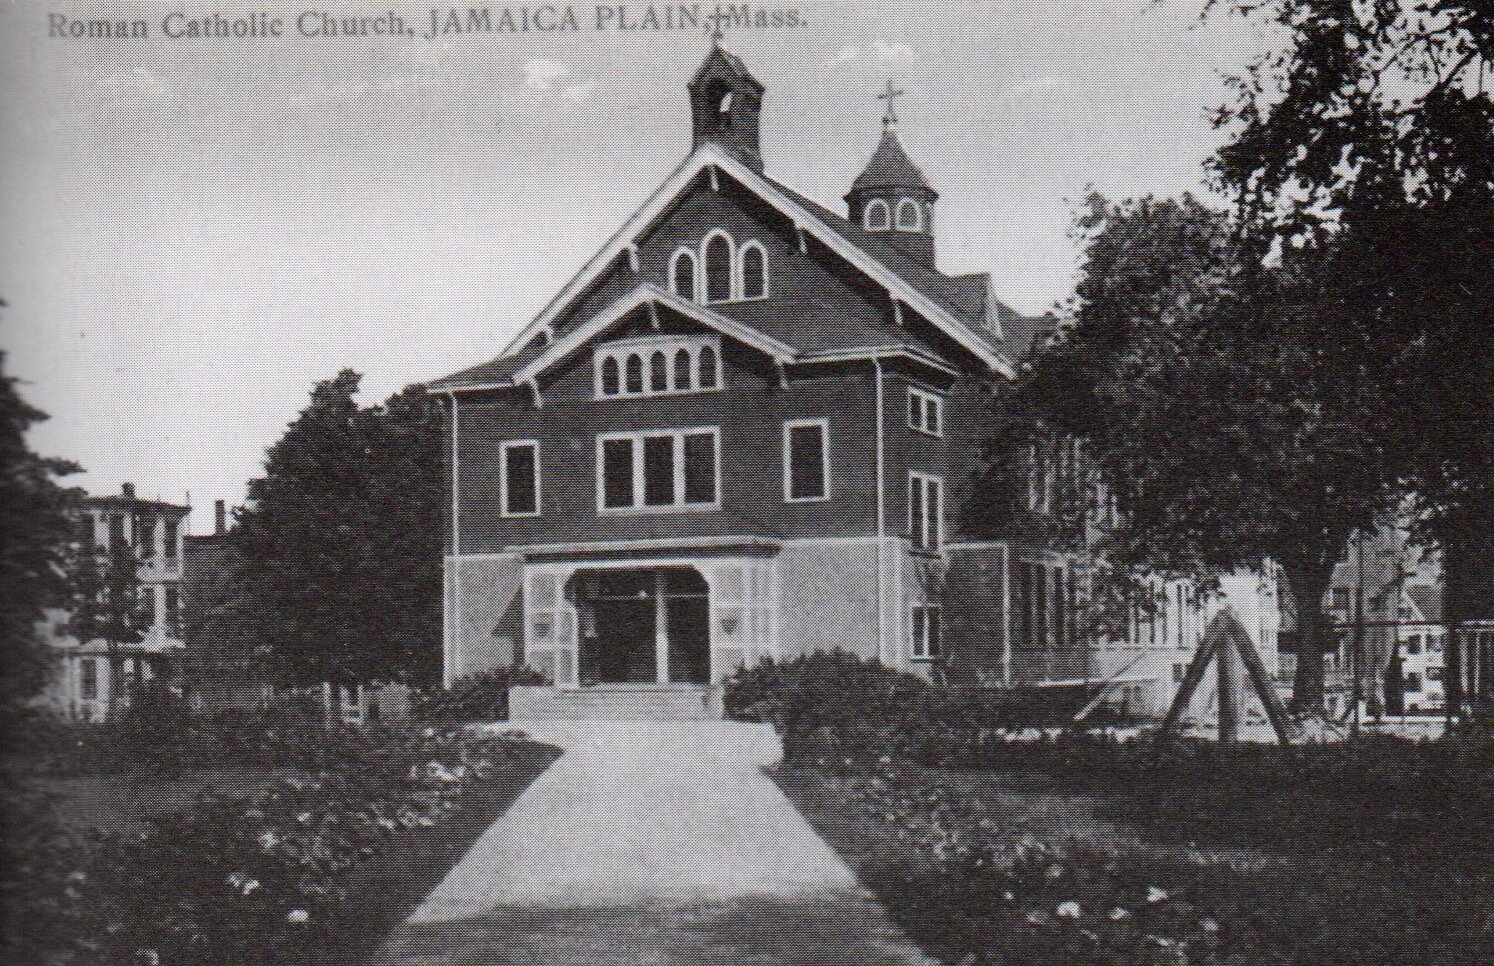 The original wooden Blessed Sacrament Church built in 1891 at the corner of Centre and Creighton Streets near Hyde Square.